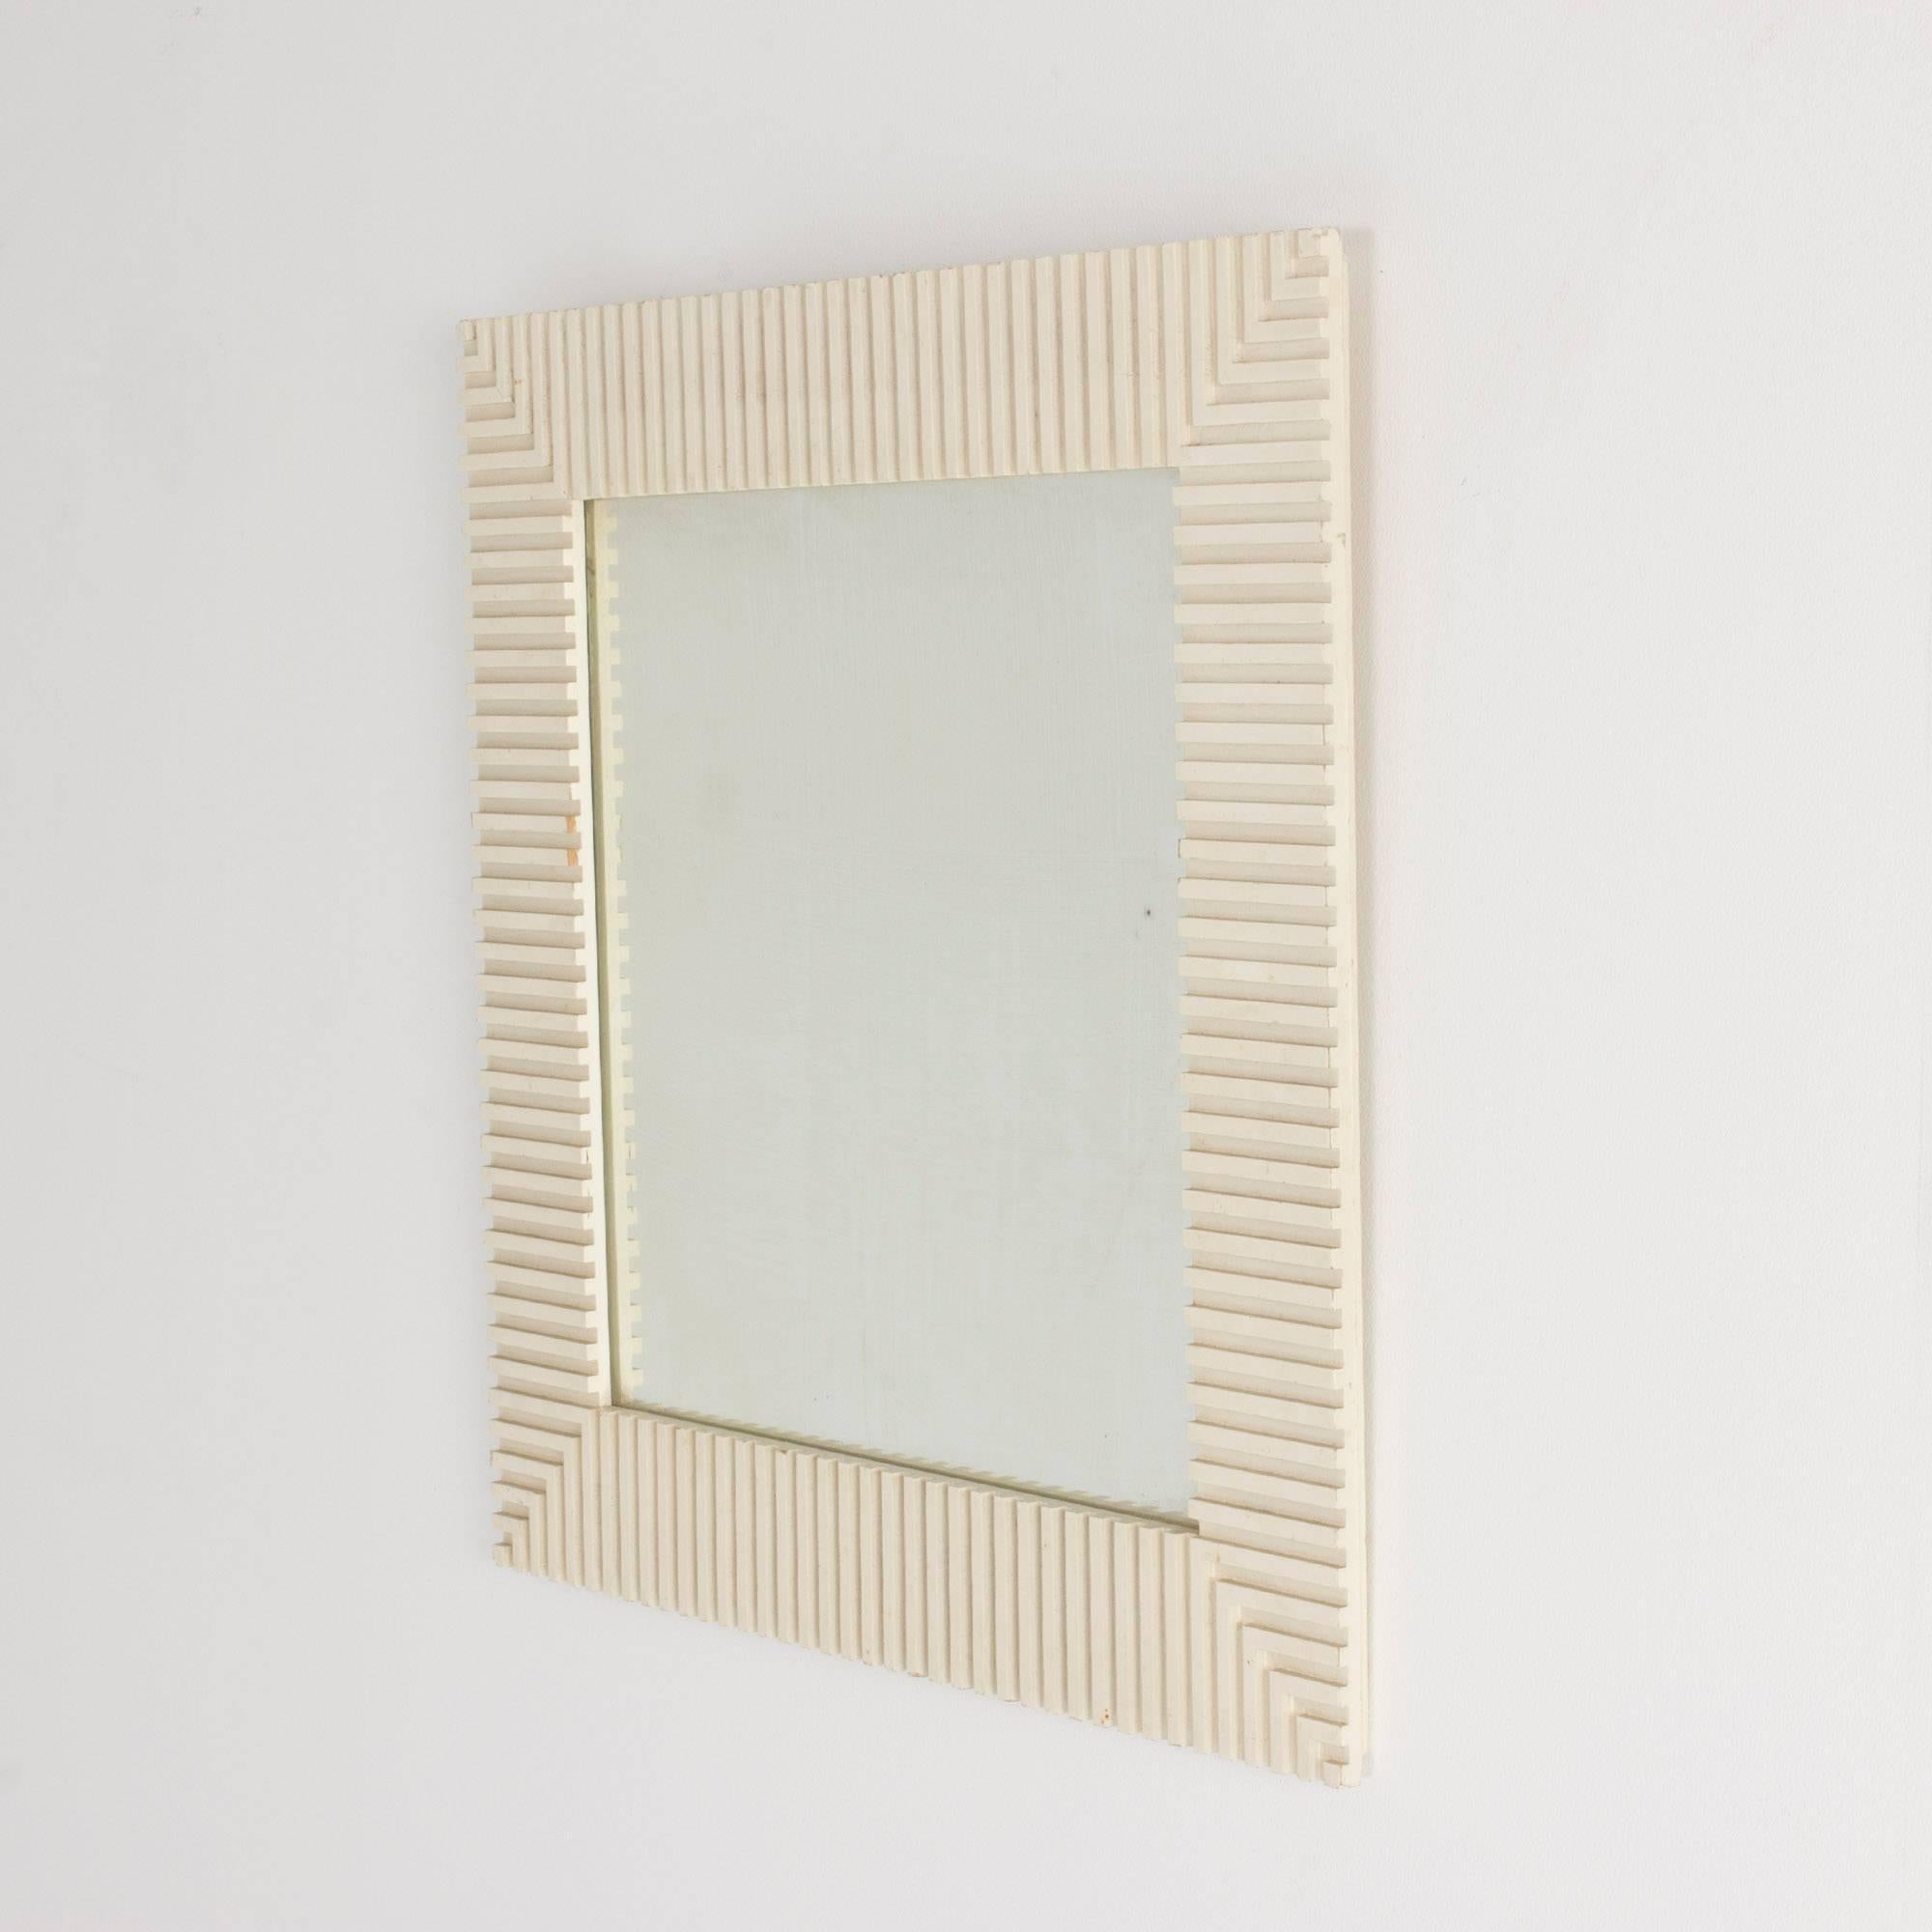 Striking, timeless wall mirror by Susanne Tucker and Maurice Holland, made from wood embossed in a geometrical fashion which gives a cool effect particularly at the corners. Frame lacquered white.